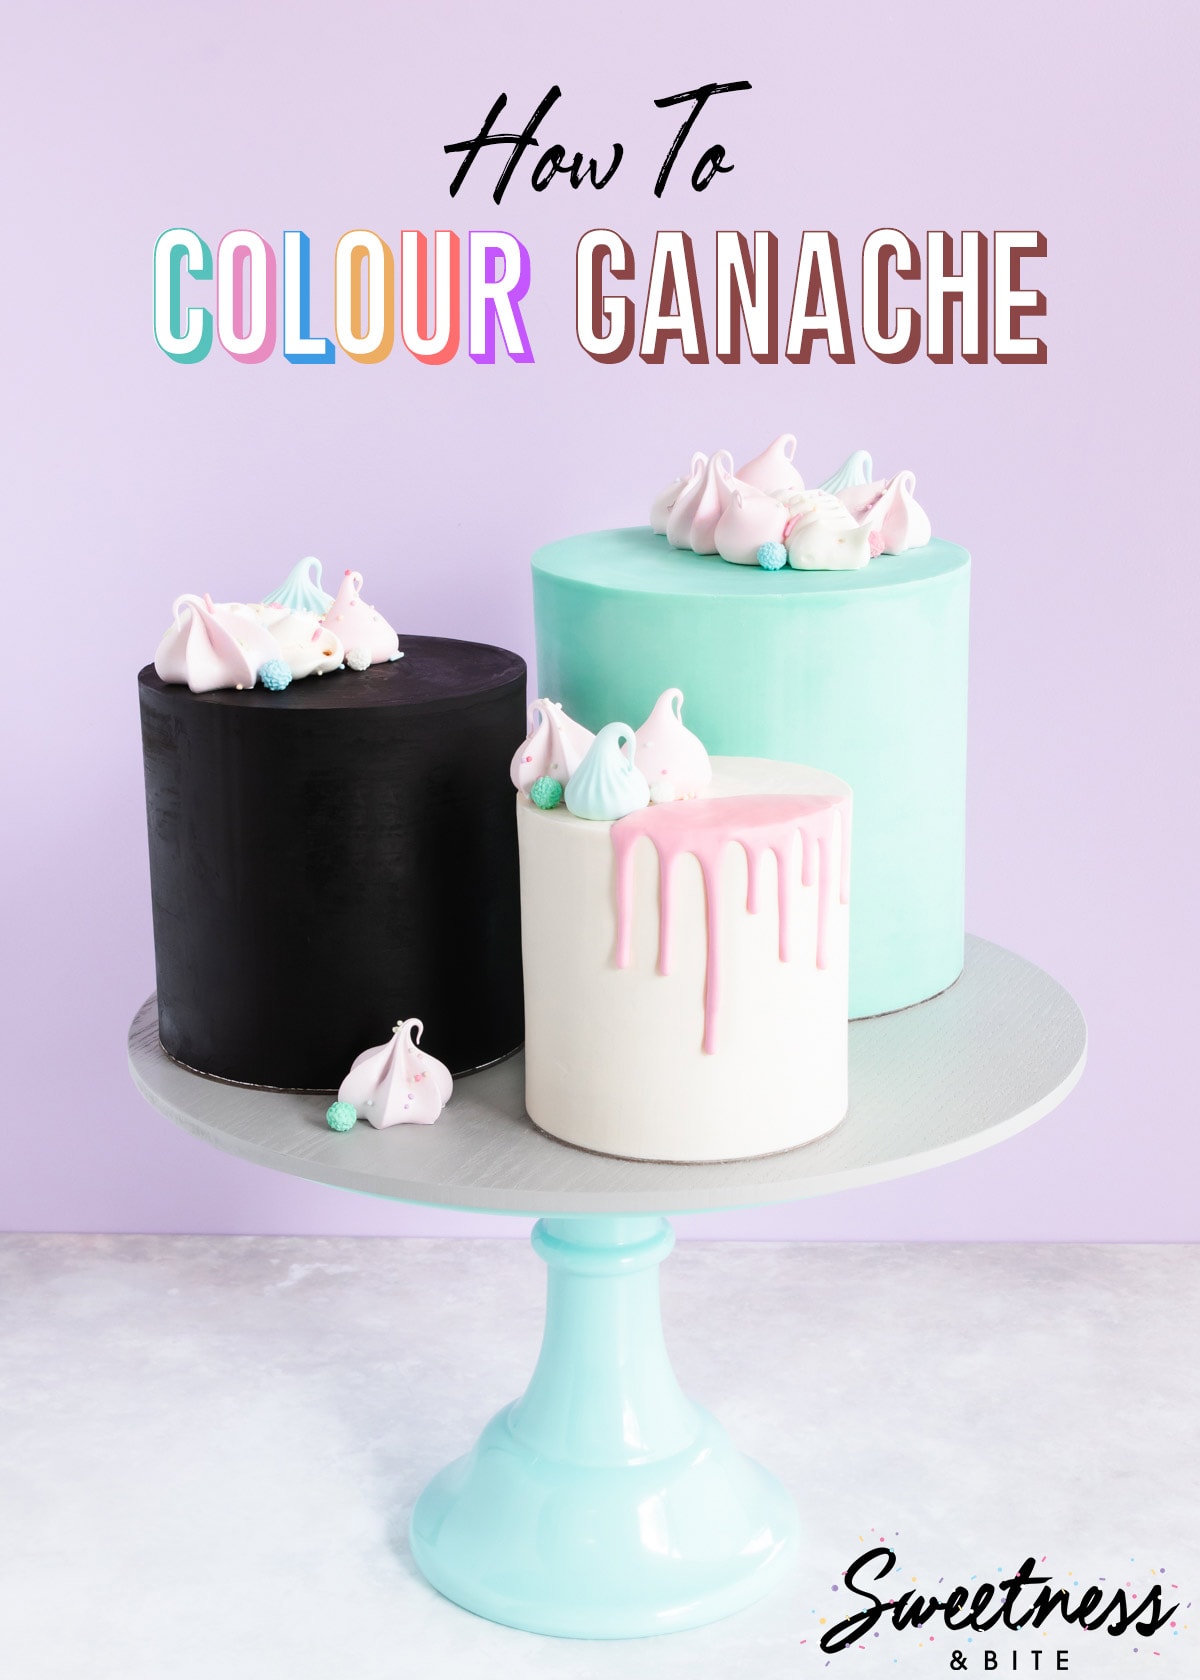 Three coloured ganache covered cakes, black, white and teal, on a cake stand with text overlay reading: 